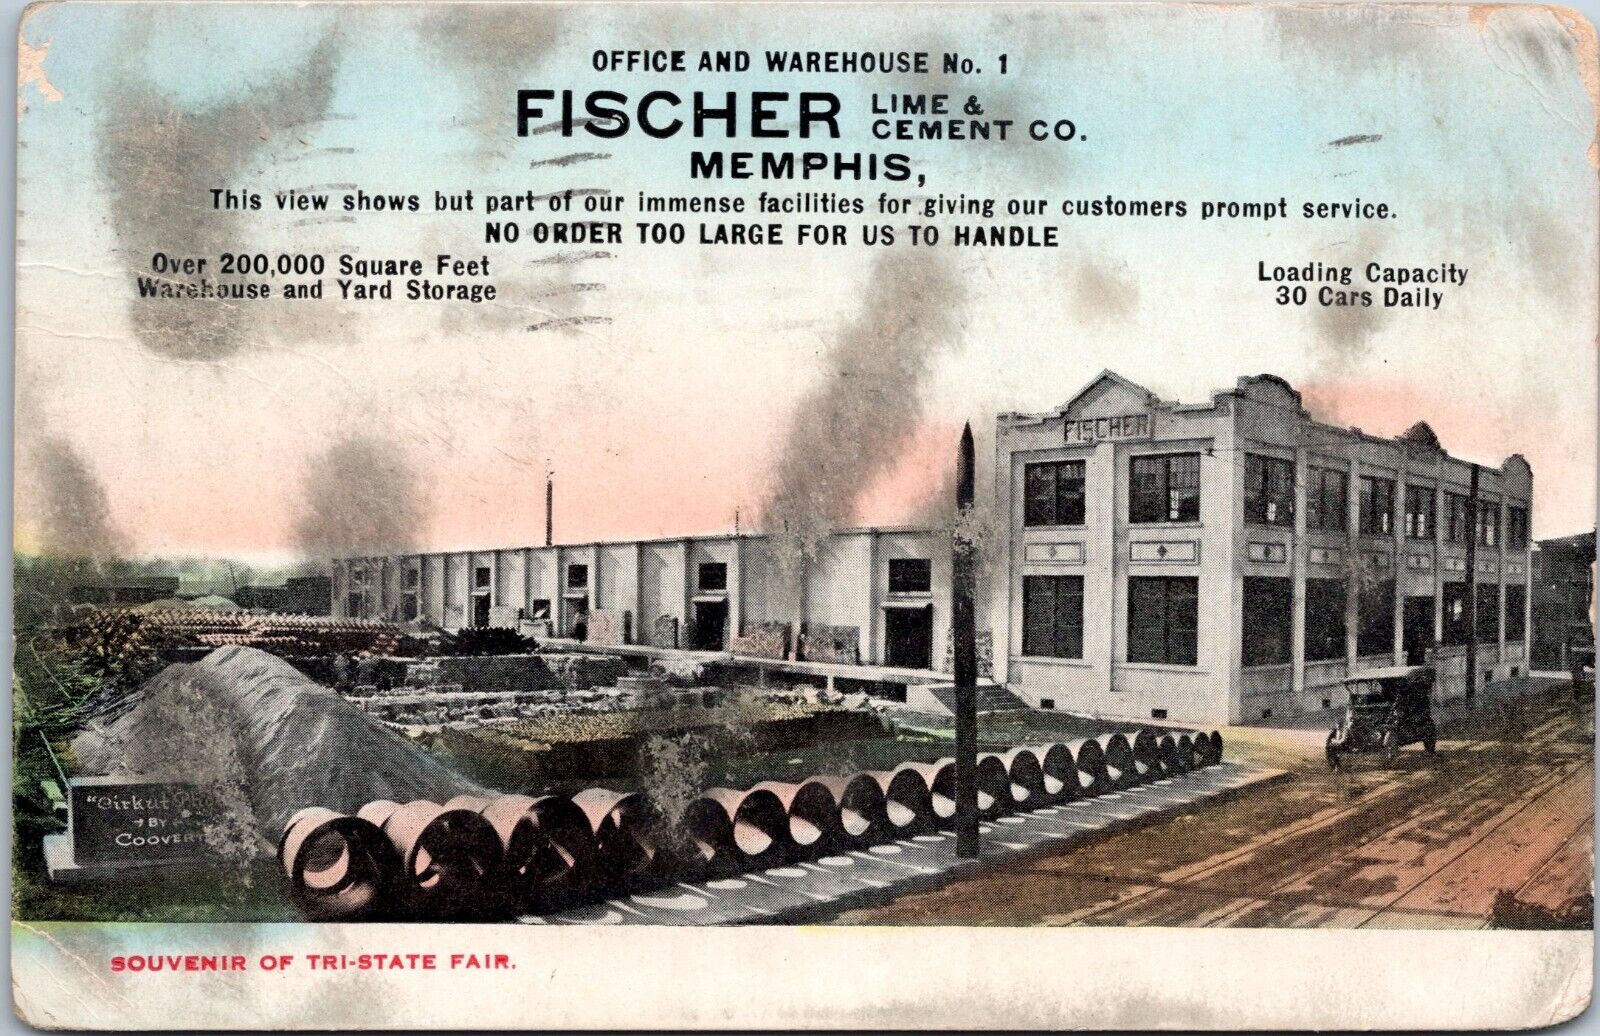 1911 Advertising Postcard- Fischer Lime and Cement, Memphis Tennessee